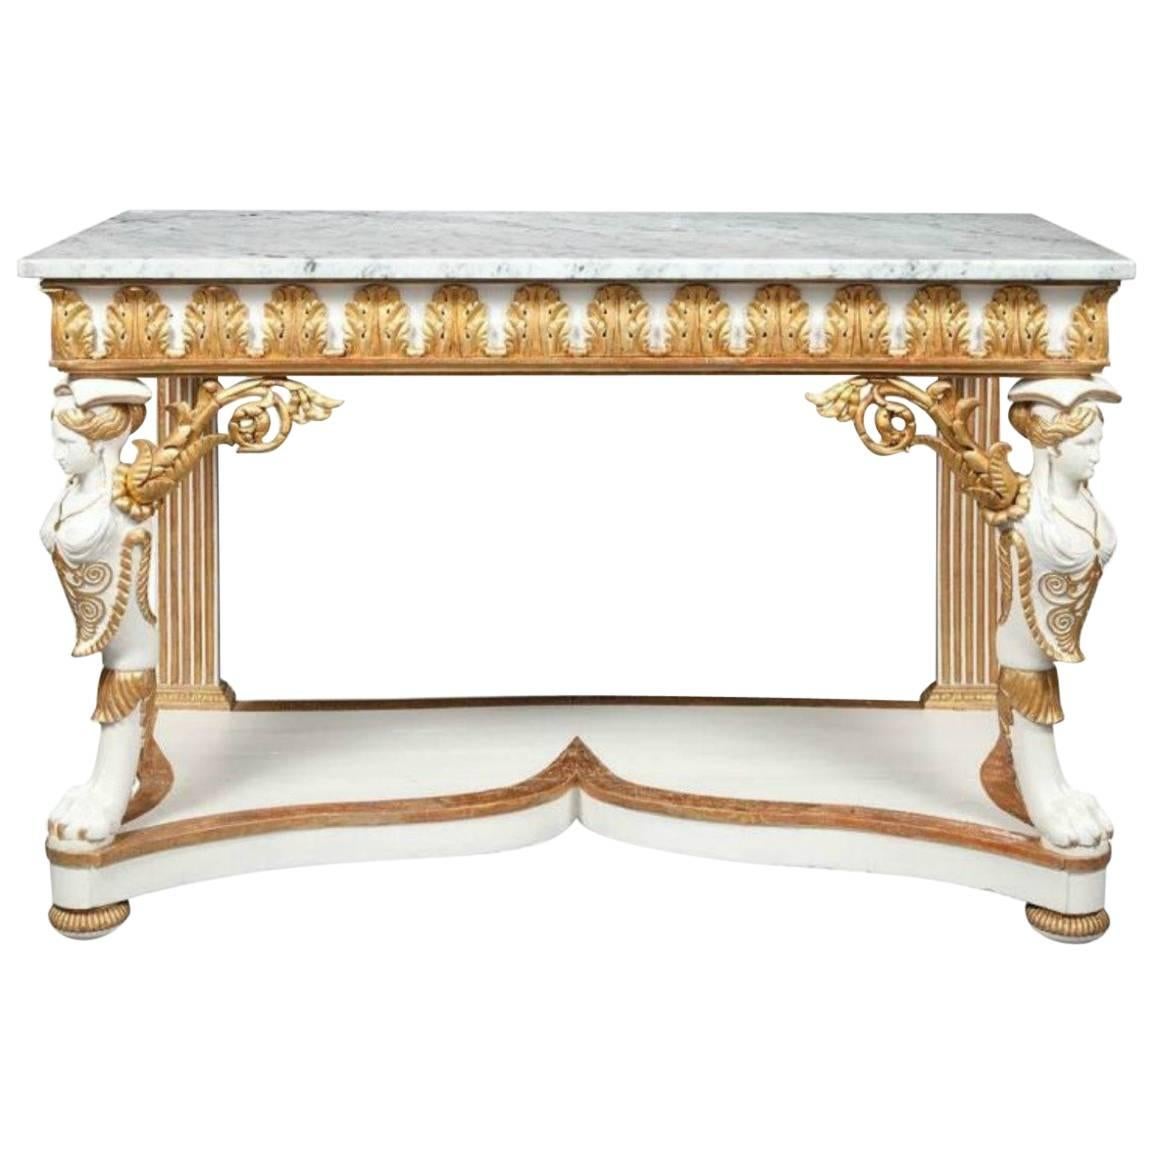 Italian Design, Neoclassical, Console, White Wood, Gilt, Marble, Italy, 1920s